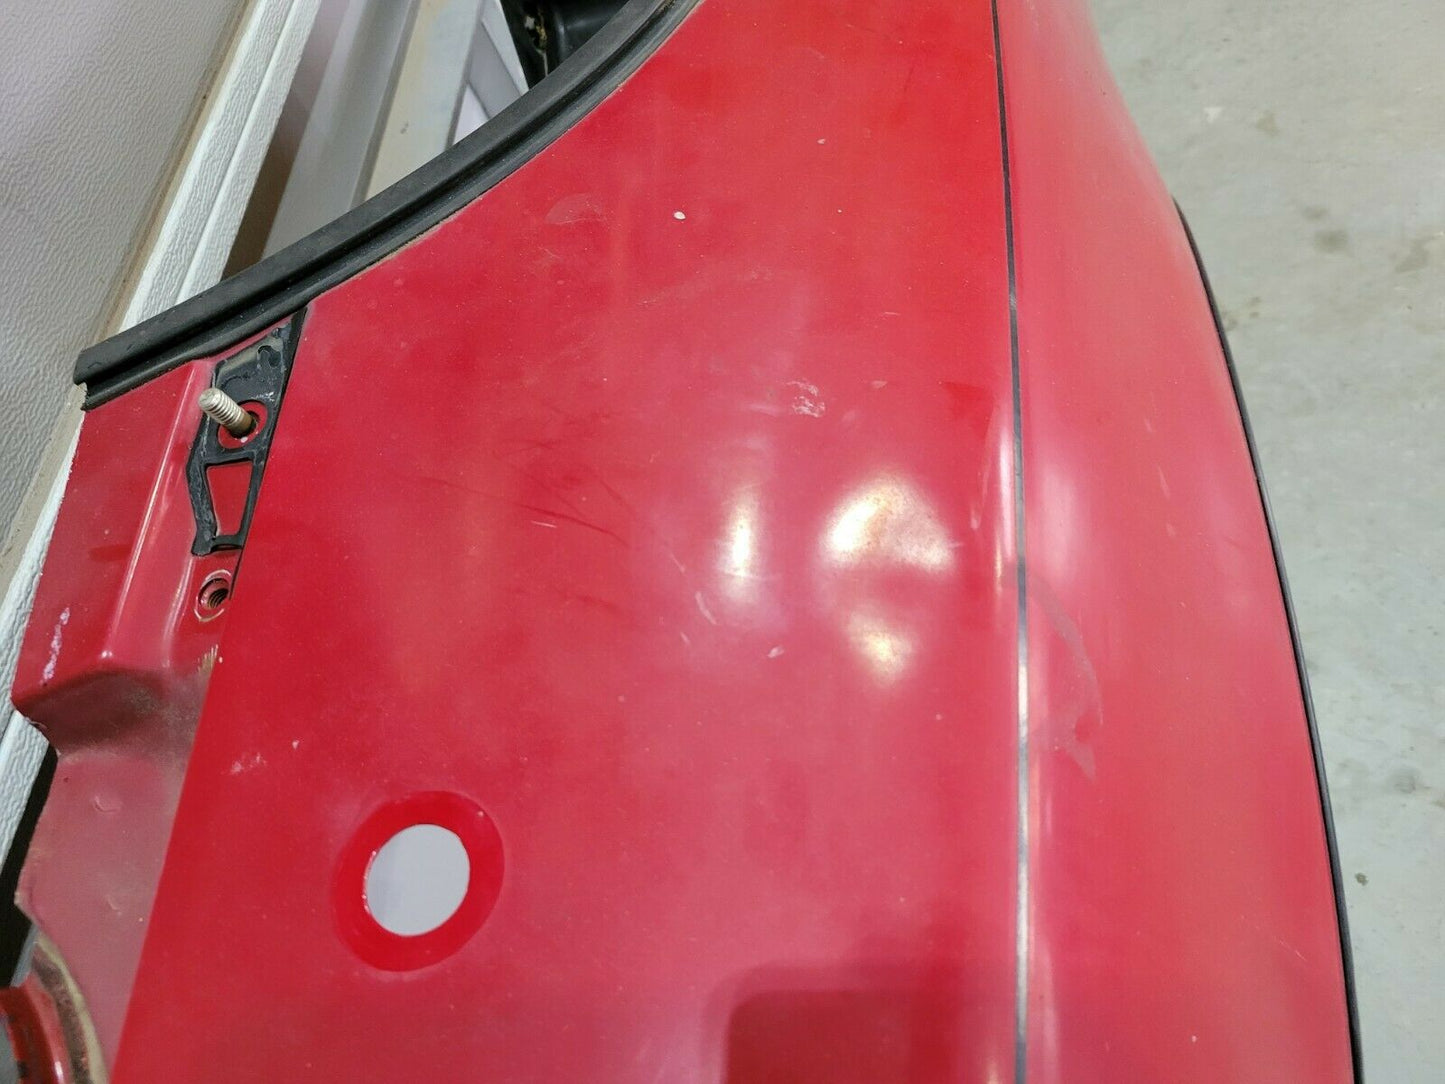 1990 1991 1992 1993 1994 1995 1996 1997 Mazda Mx5 Rear quater panel Cut out